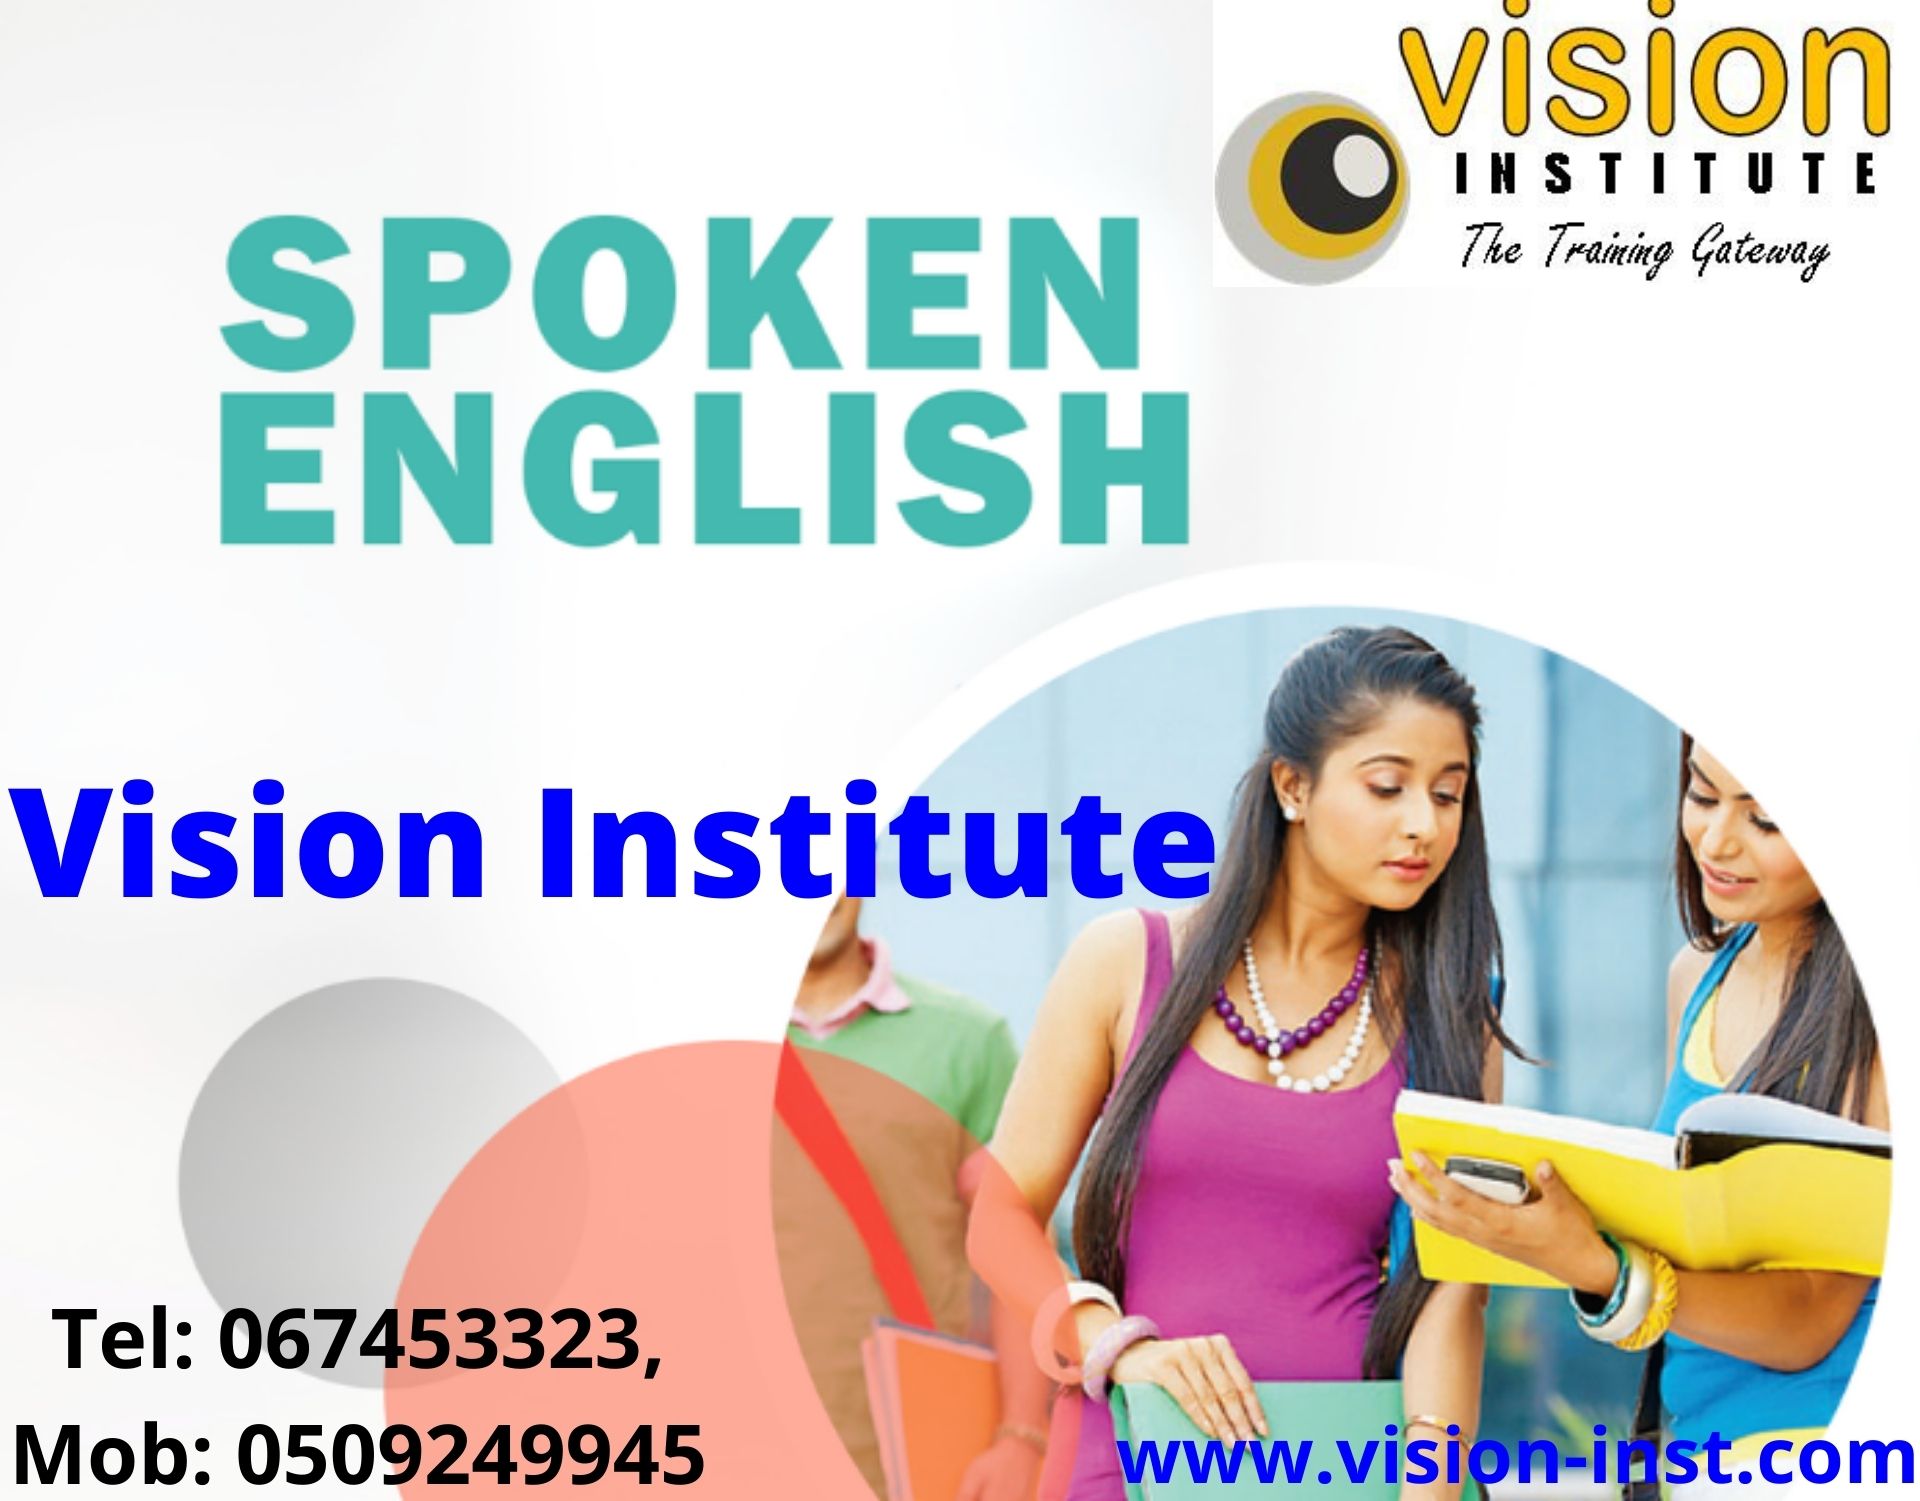 Spoken English Courses at Vision Institute. Call 0509249945